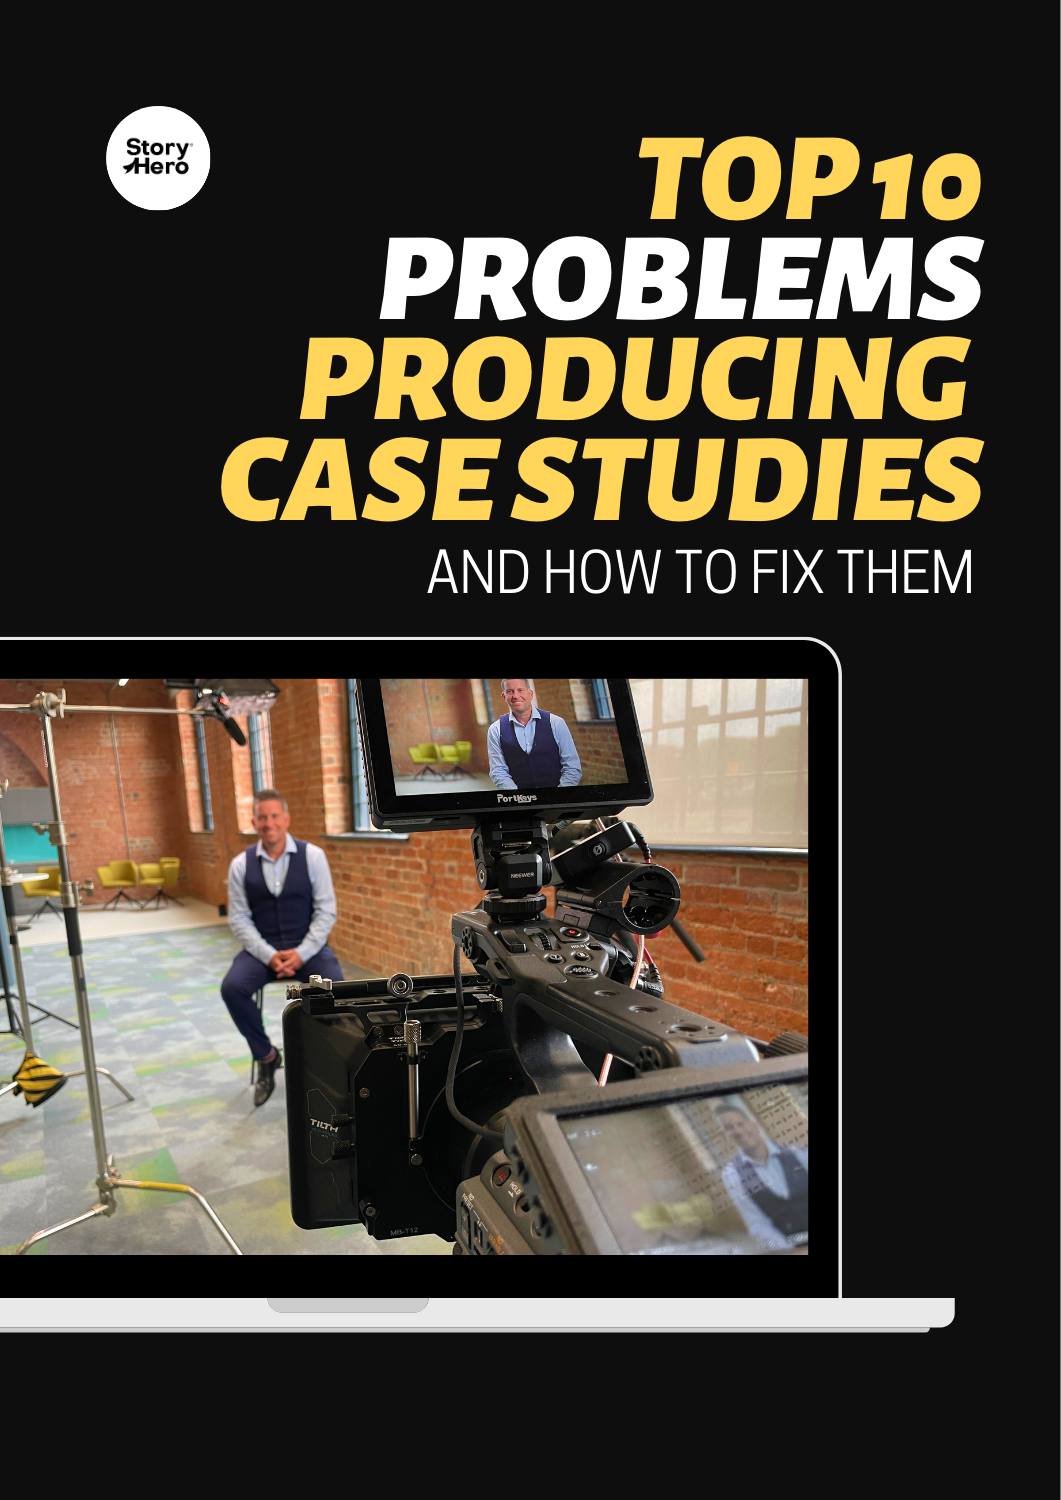 Top 10 Problems Producing Case Studies & How To Fix Them